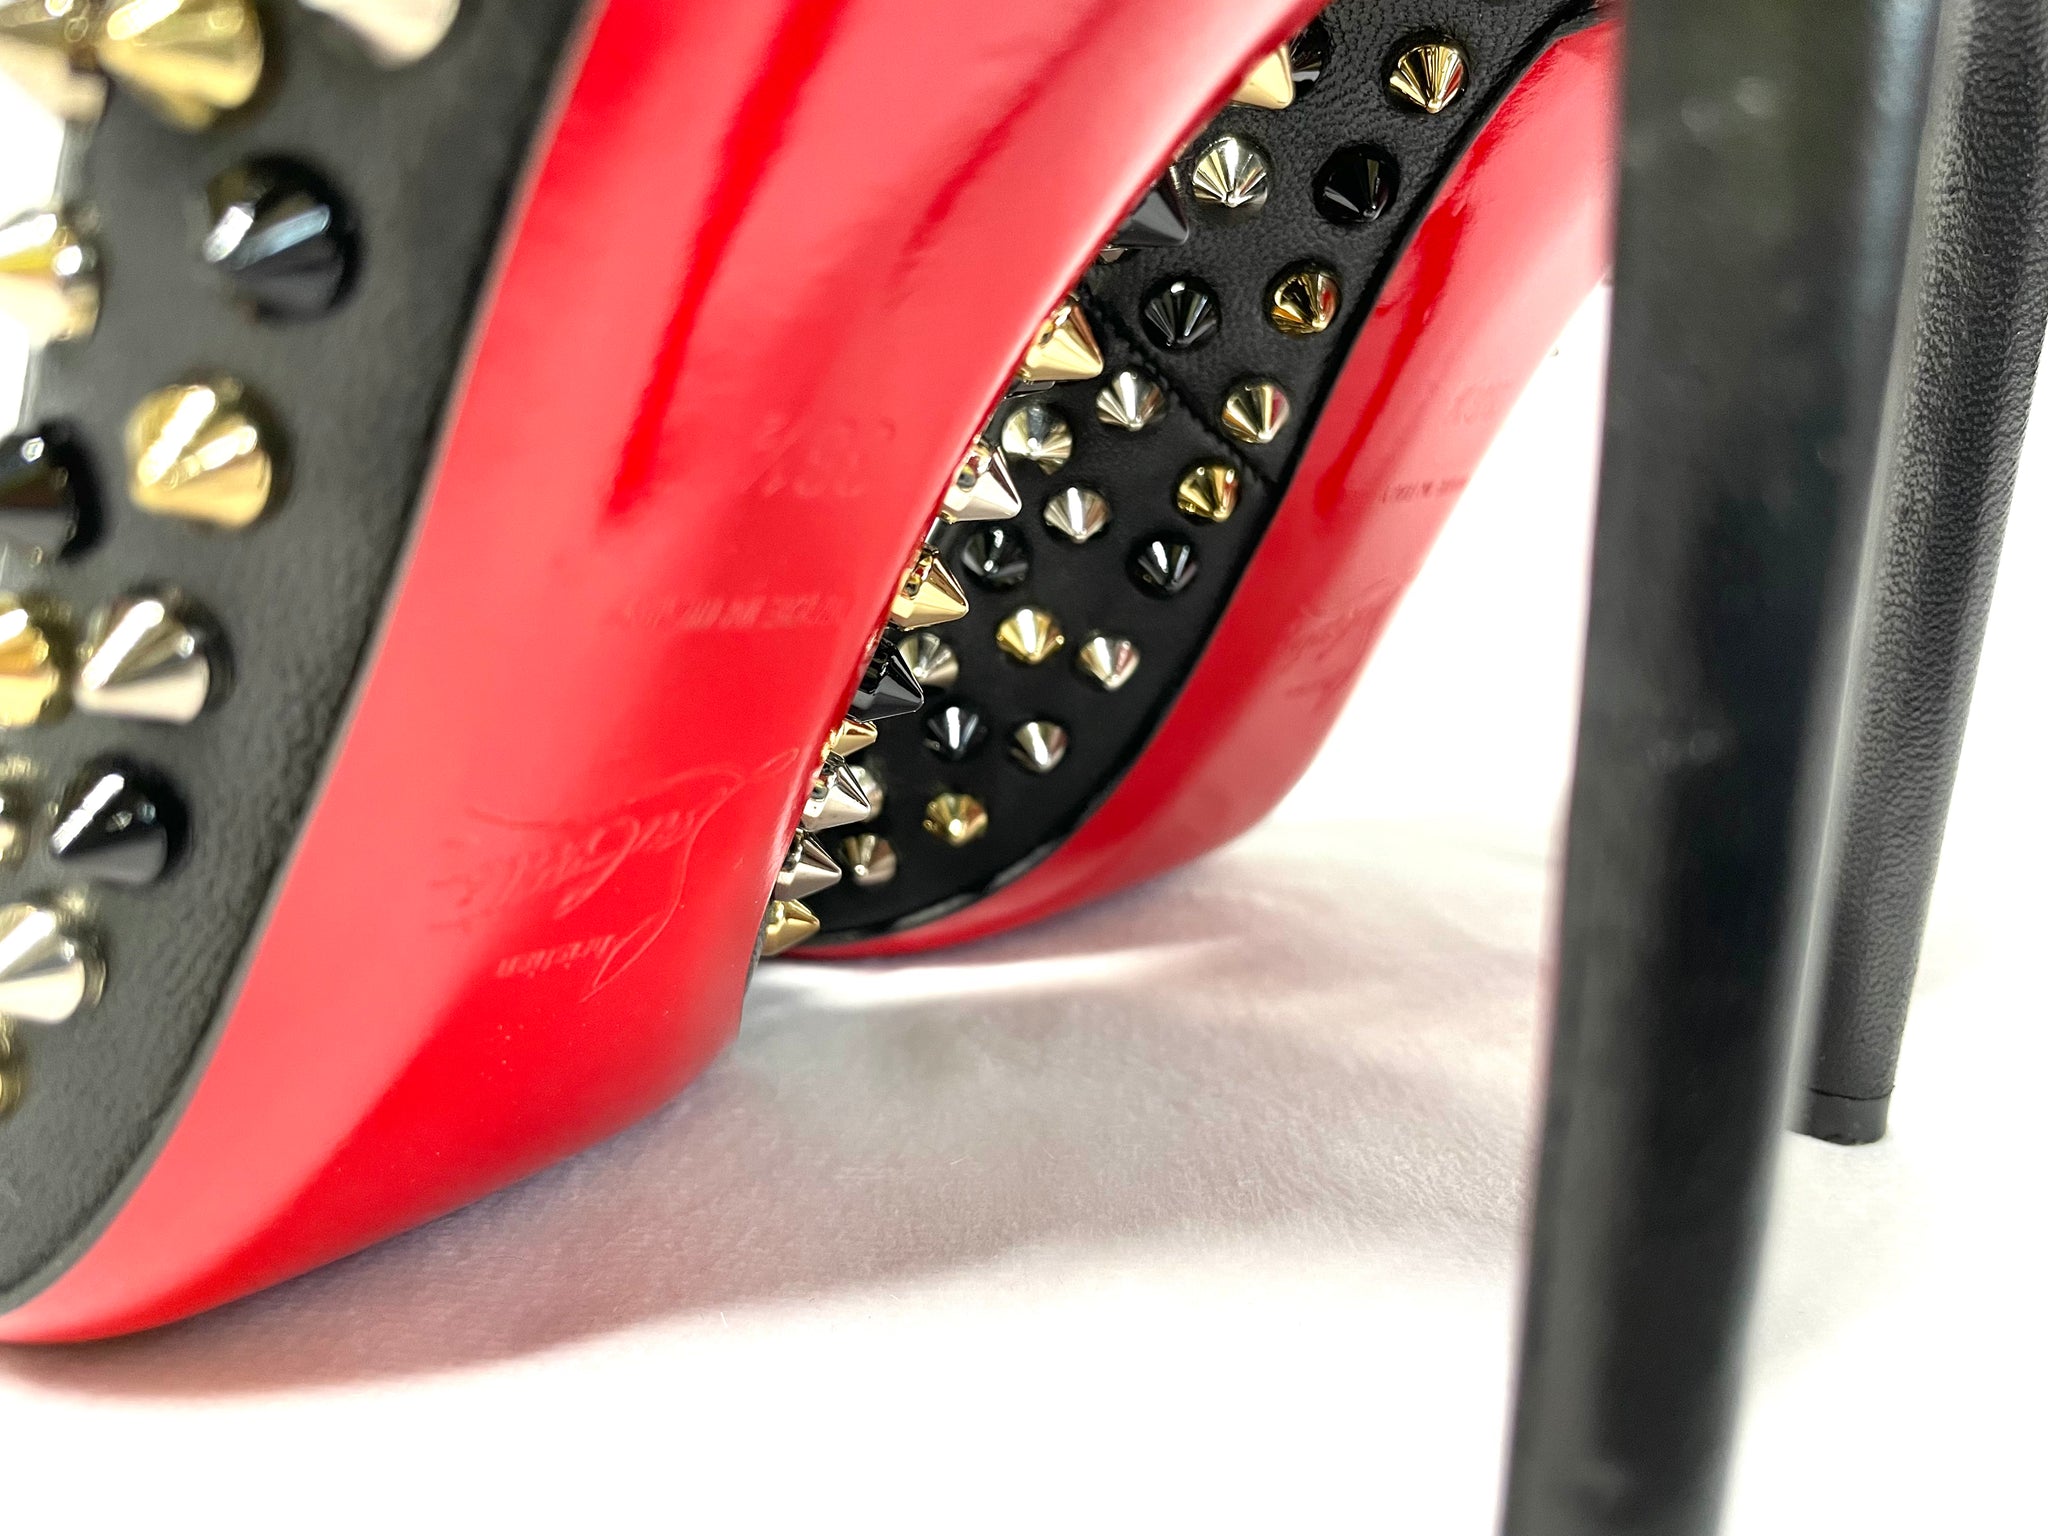 Pre Loved Christian Louboutin Studded Pigalle Pumps 36.5 Black Heels with studs available at UniKoncept in Waterloo